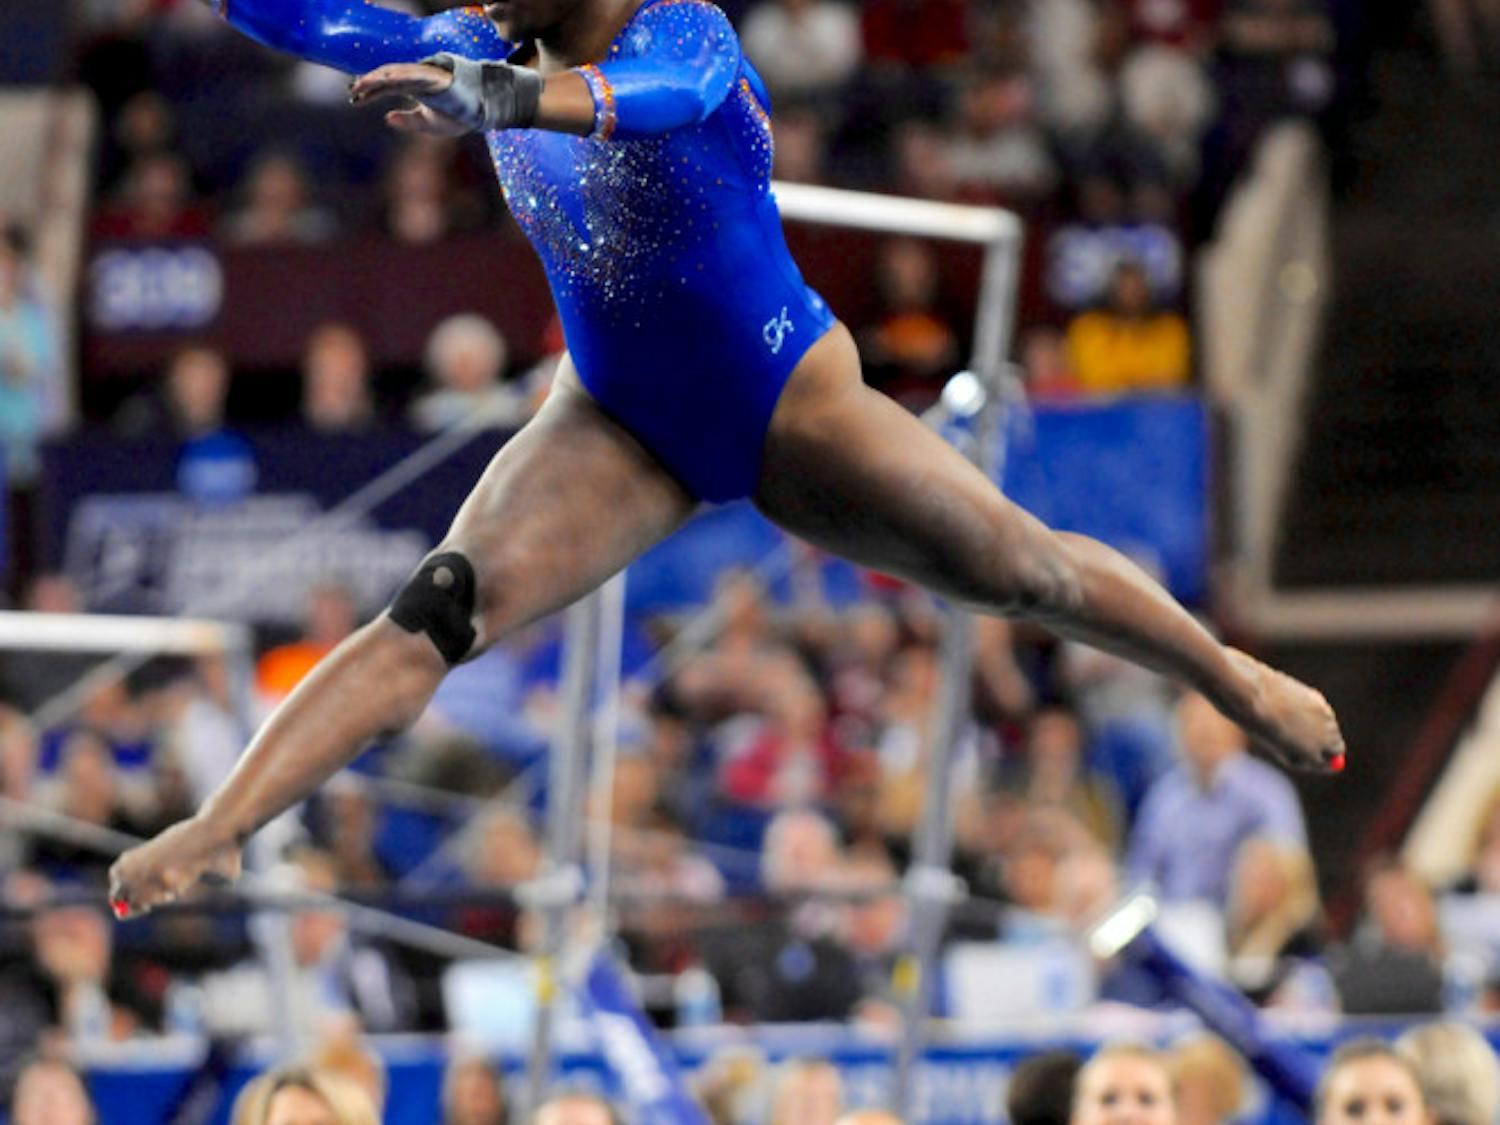 Alicia Boren performs her floor exercise routine during the NCAA Gymnastics Super Six on April 16, 2016, in Fort Worth, Texas.